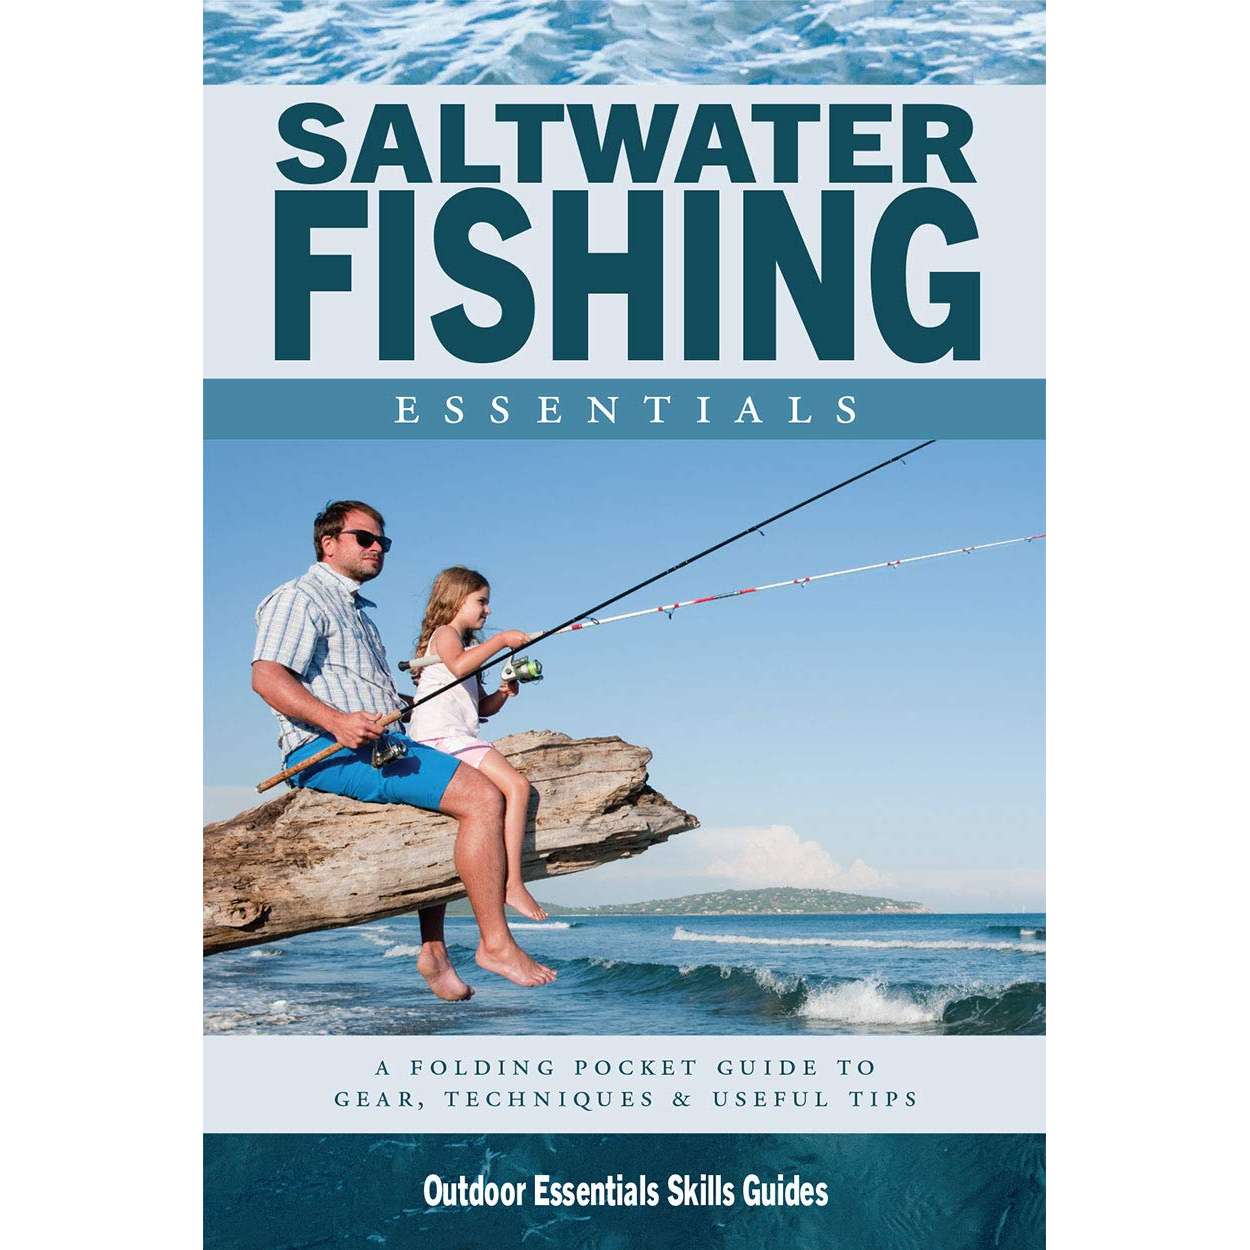 Saltwater Fishing Essentials: A Waterproof Folding Pocket Guide for Beginning and Experienced Anglers [Book]